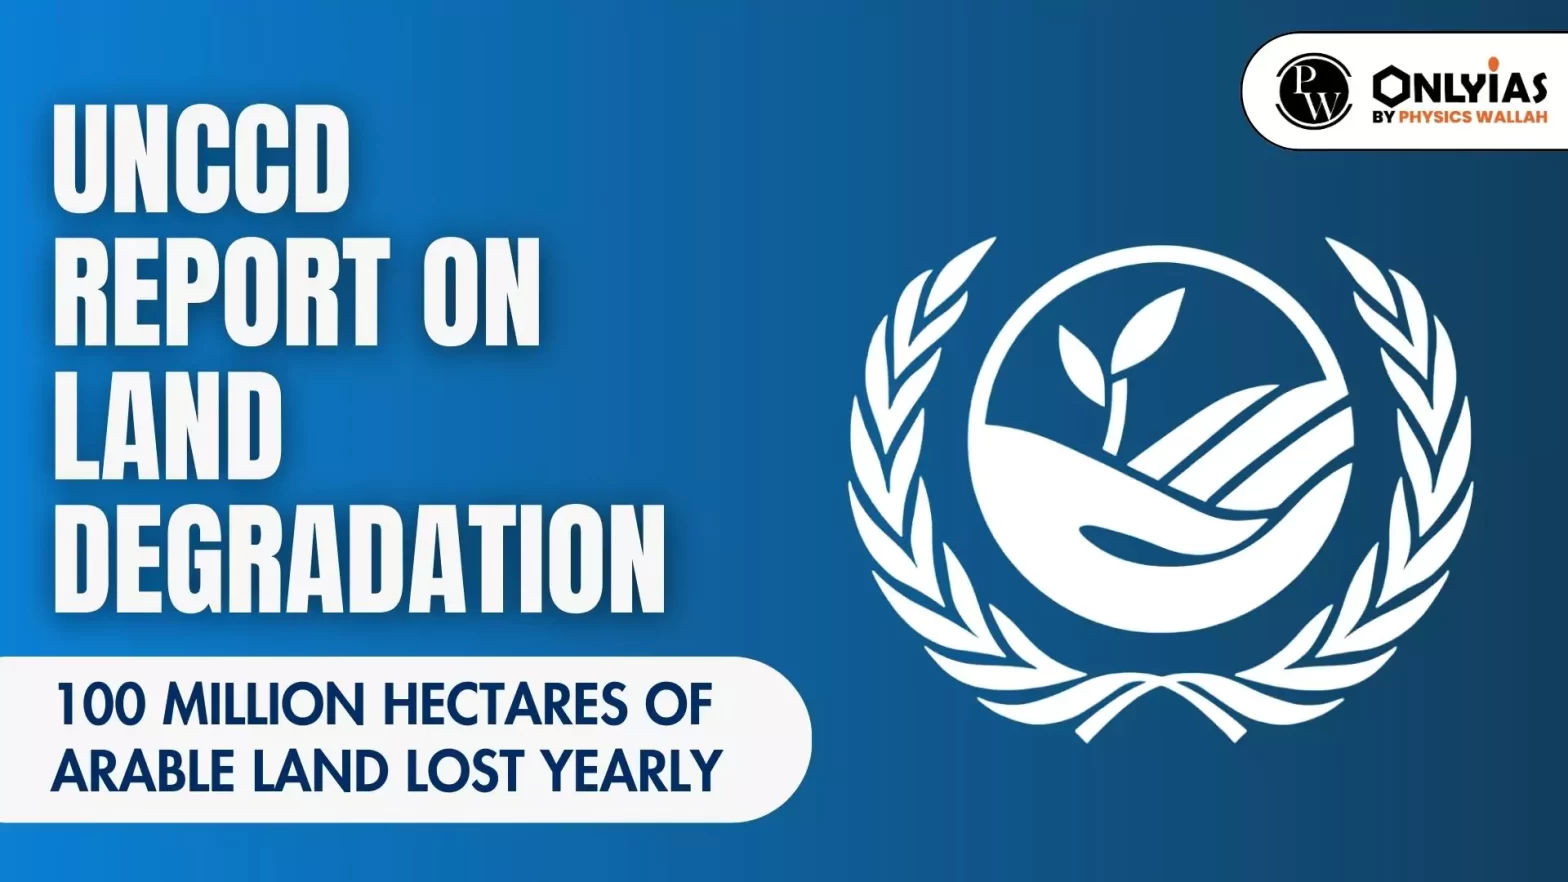 UNCCD Report on Land Degradation: 100 Million Hectares of Arable Land Lost Yearly